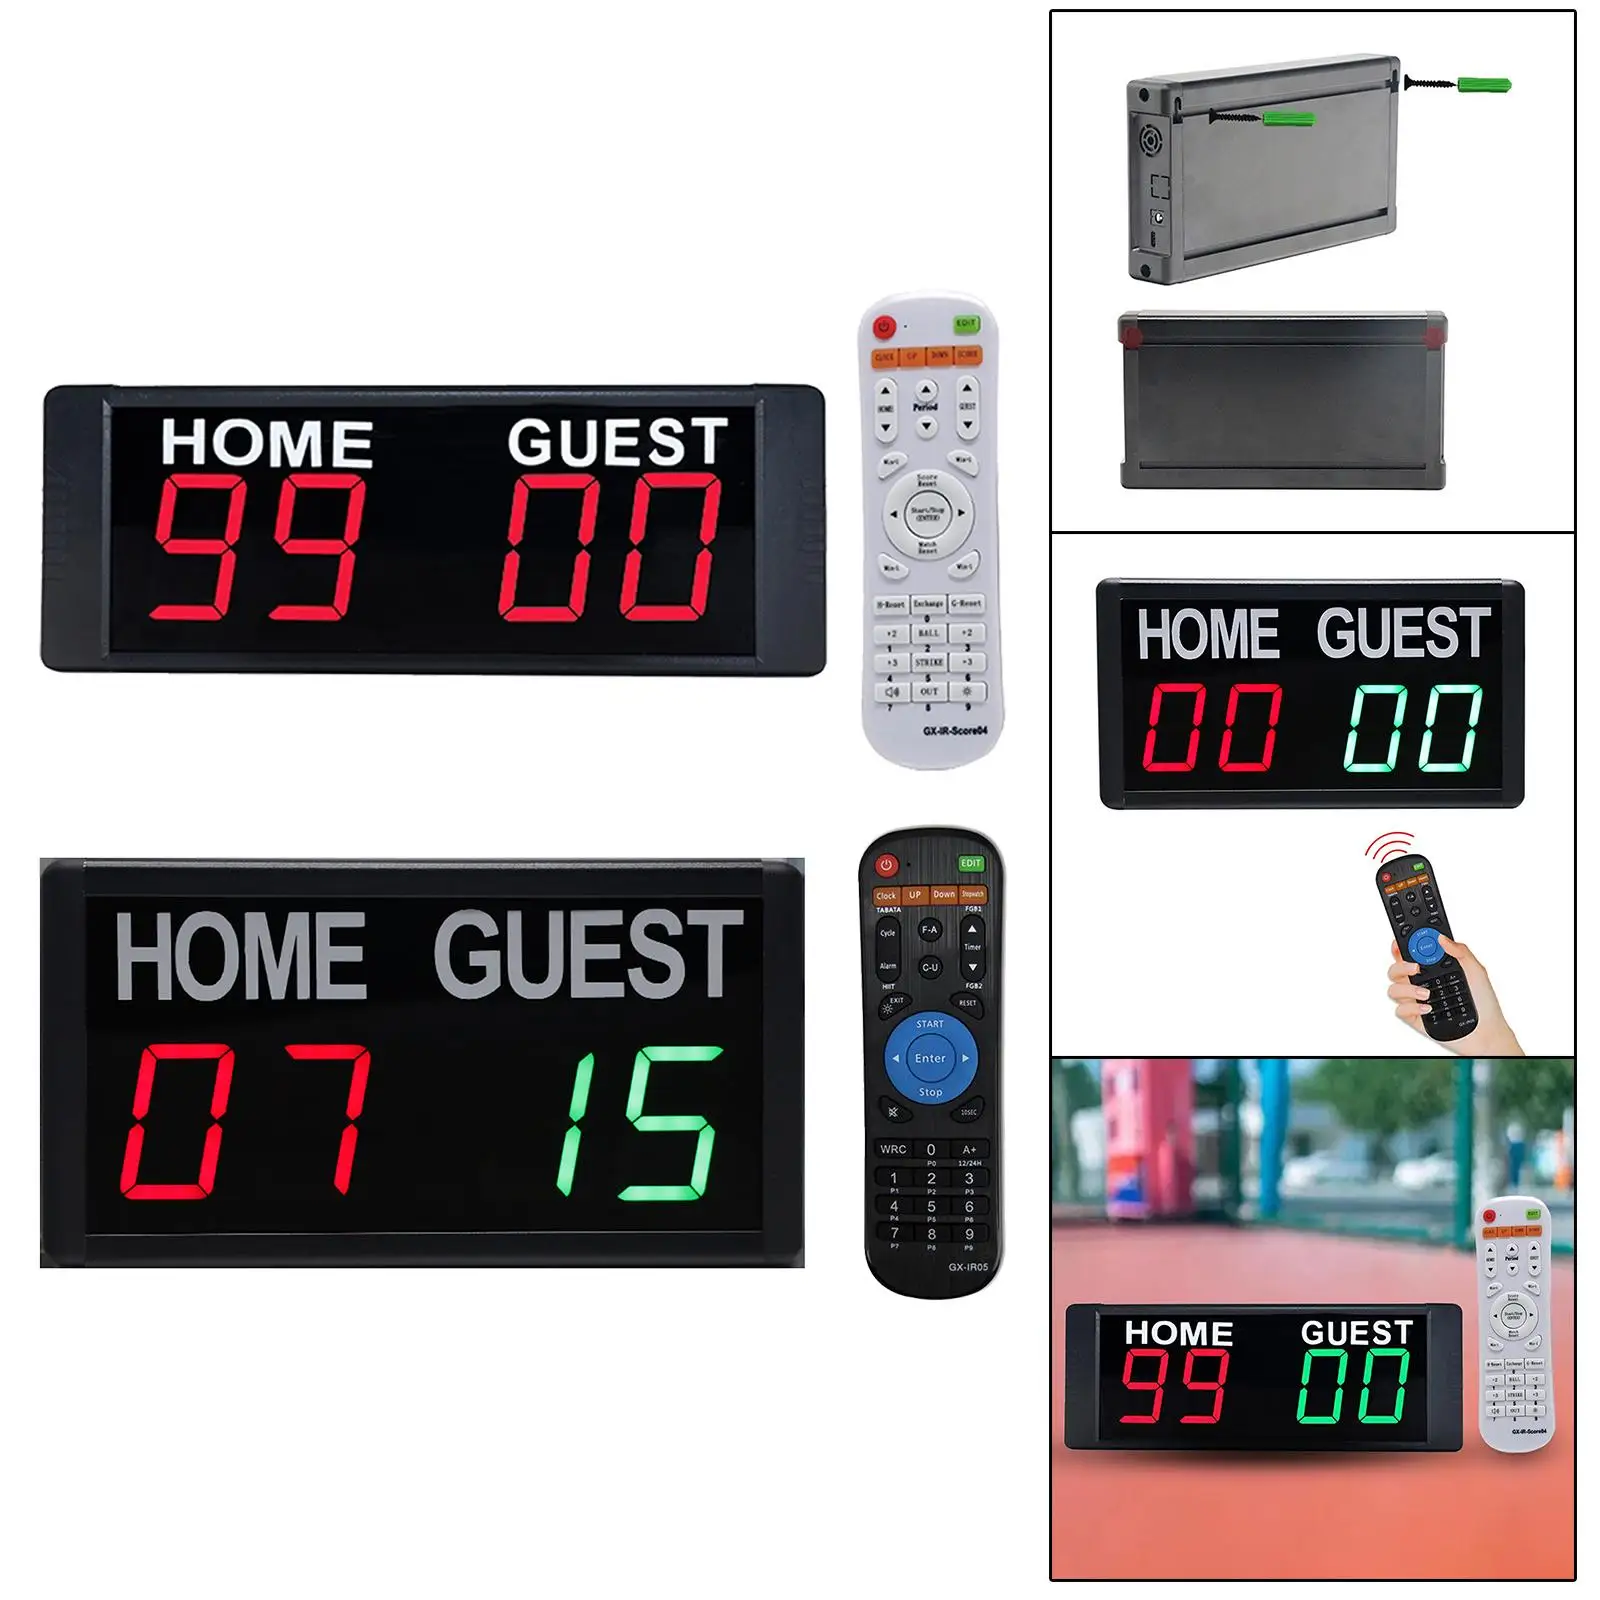 Multifunctional Electronic Digital Scoreboard Counter Counting Stopwatch Indoor Score Keeper for Soccer Wrestling Sports Tennis